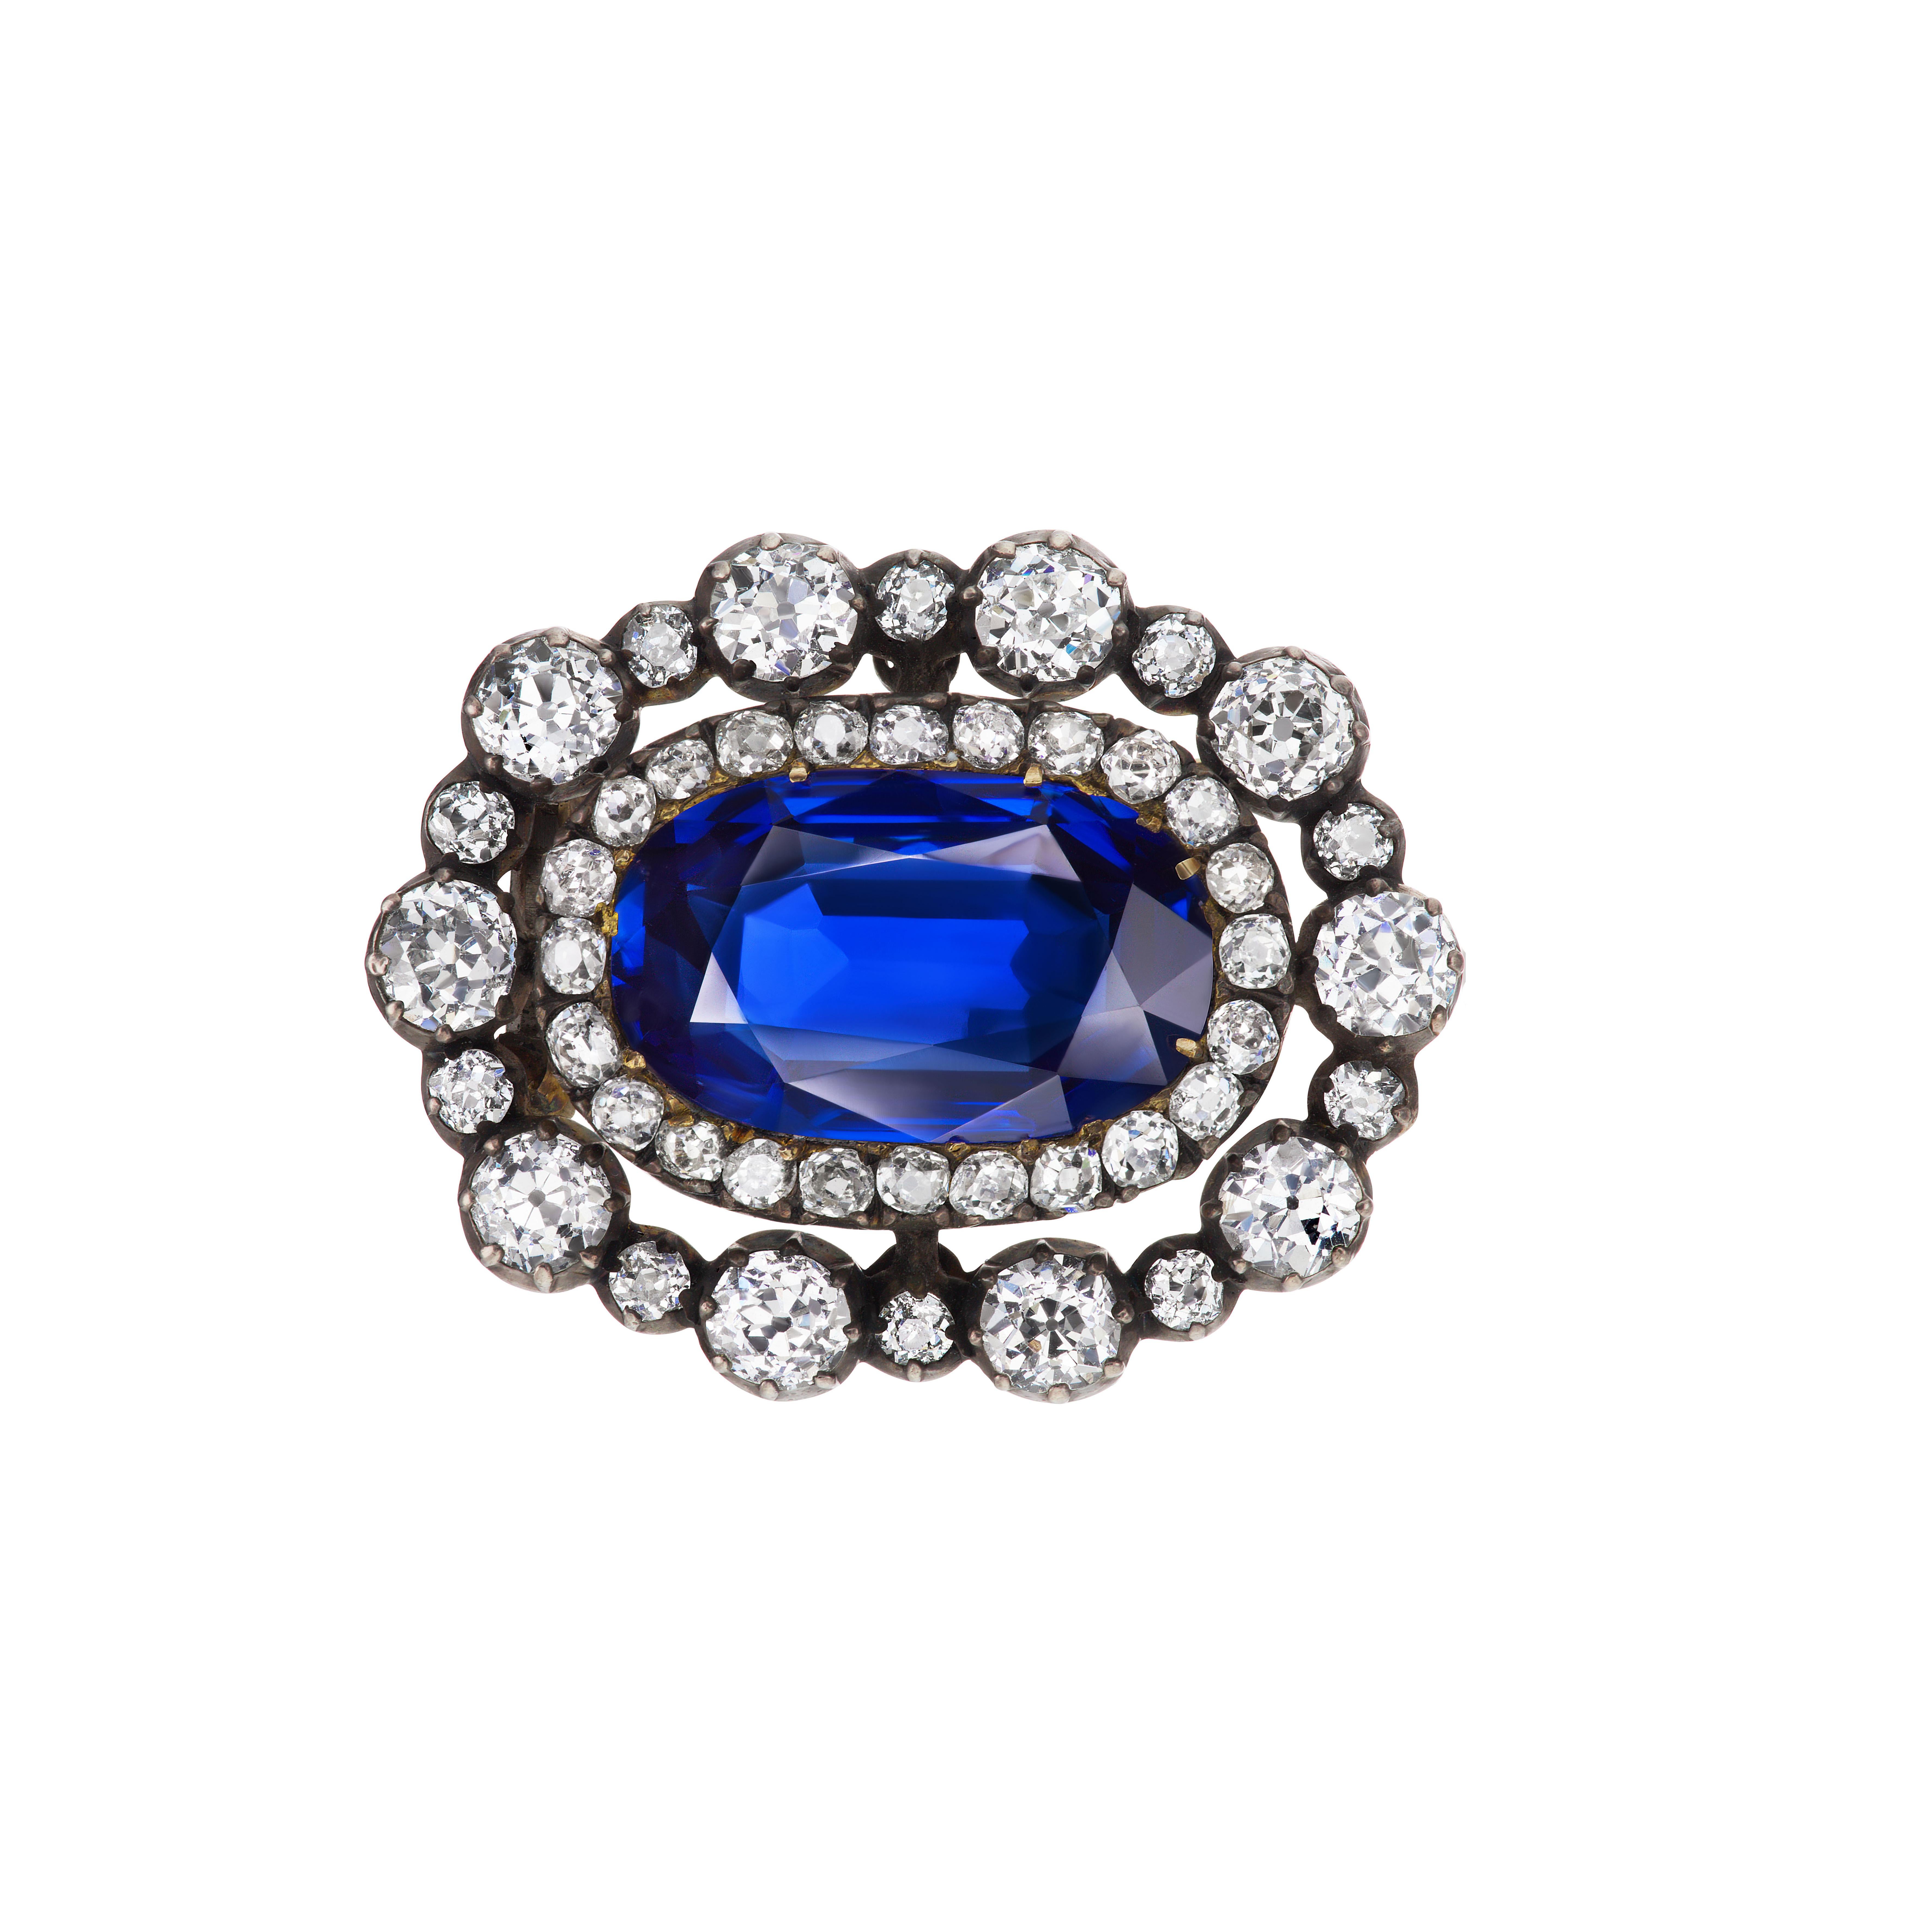 This charming Victorian era brooch is mounted with an exquisite oval Burma sapphire weighing approximately 8.20 carats surrounded by a double oval of antique european cut diamonds of superb color and clarity weighing approximately 5.55 carats. 

AGL